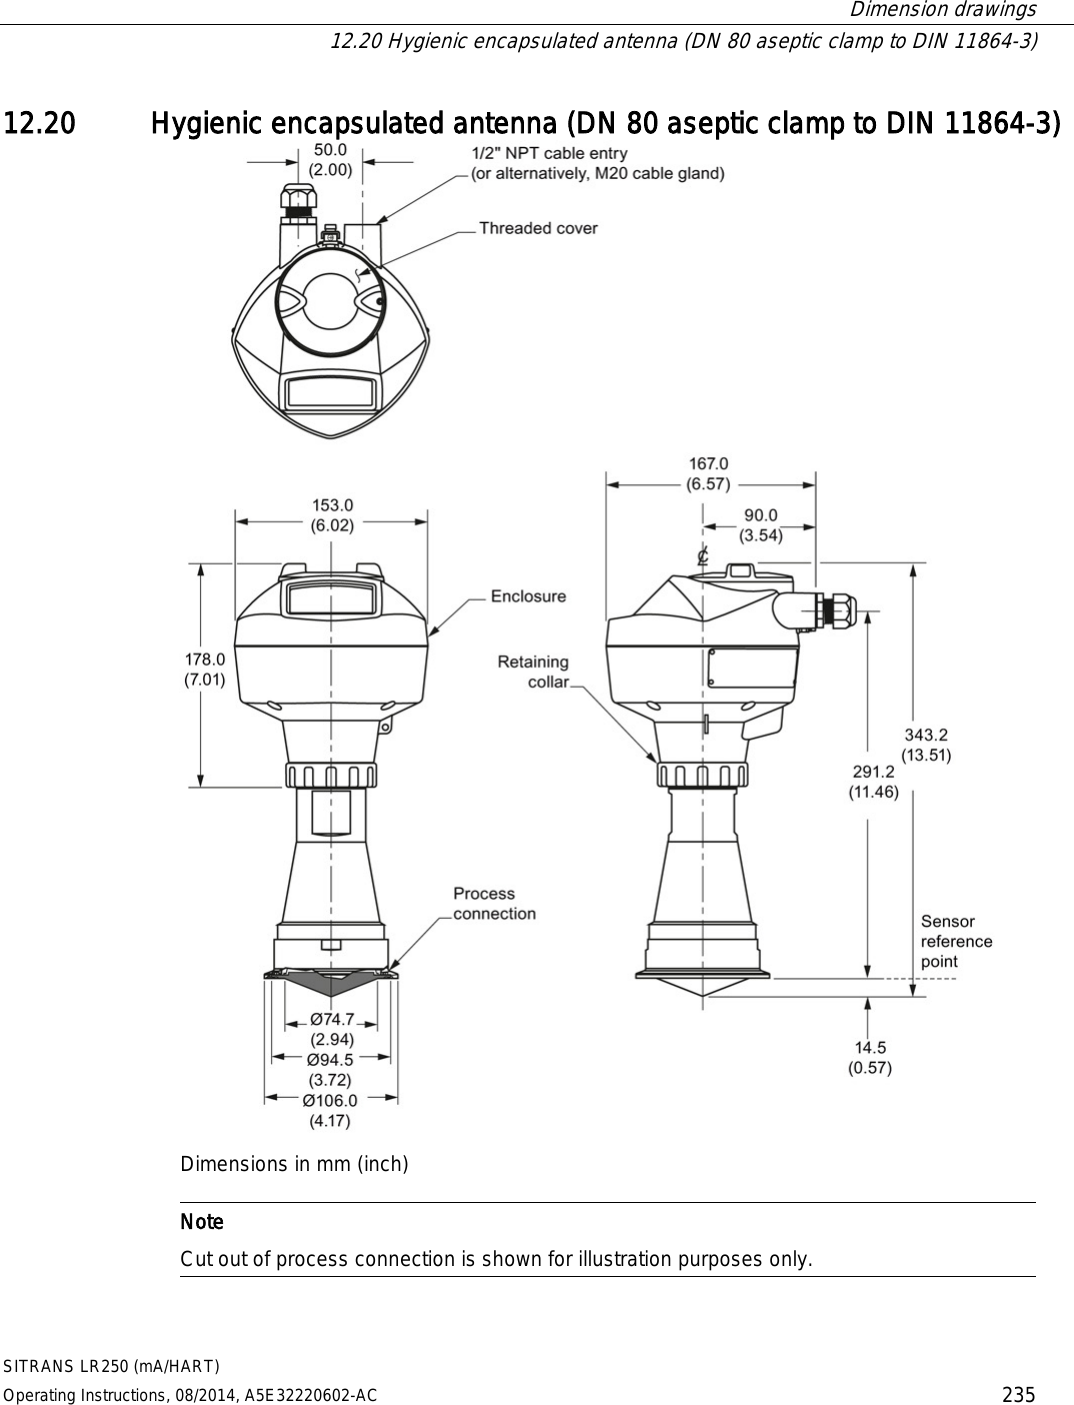  Dimension drawings  12.20 Hygienic encapsulated antenna (DN 80 aseptic clamp to DIN 11864-3) SITRANS LR250 (mA/HART) Operating Instructions, 08/2014, A5E32220602-AC 235 12.20 Hygienic encapsulated antenna (DN 80 aseptic clamp to DIN 11864-3)  Dimensions in mm (inch)   Note Cut out of process connection is shown for illustration purposes only.  